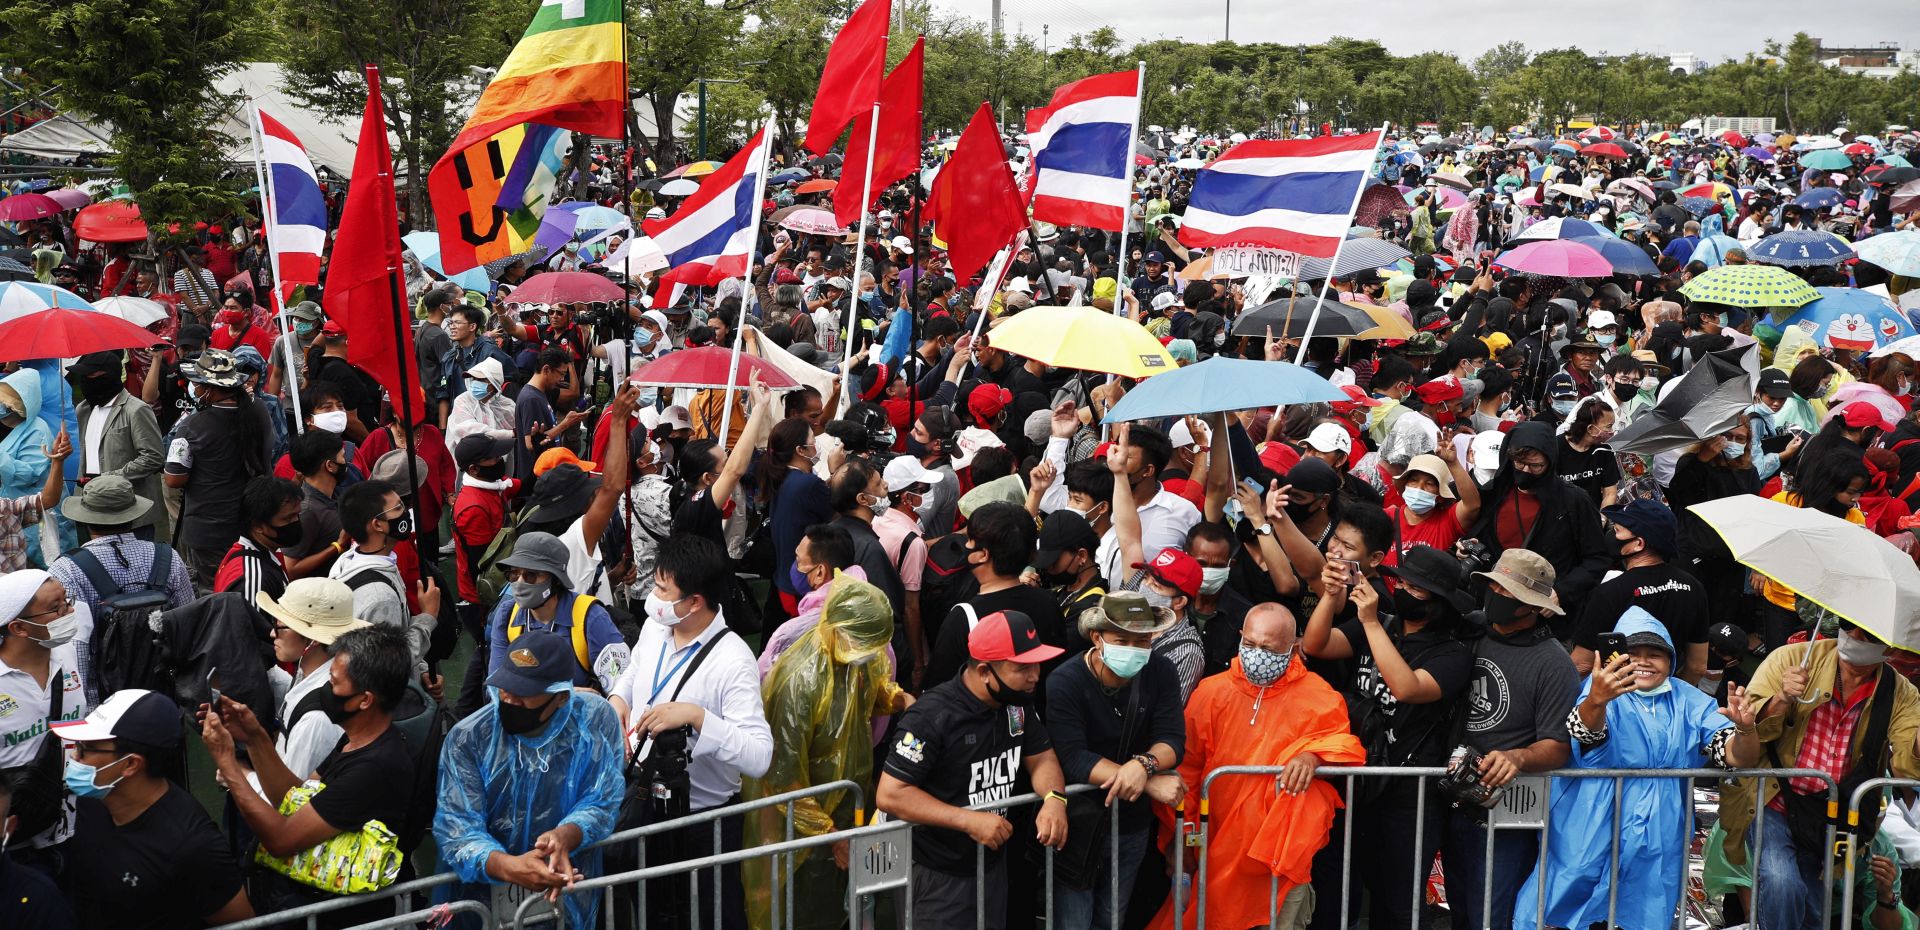 epa08680264 Pro-democracy protesters wave flags during an anti-government protest at the Royal Ground of Sanam Luang in Bangkok, Thailand, 19 September 2020. Tens of thousands of anti-government protesters led by students were taking part in a mass rally against the royalist elite and the military-backed government calling for political and monarchy reforms.  EPA/RUNGROJ YONGRIT